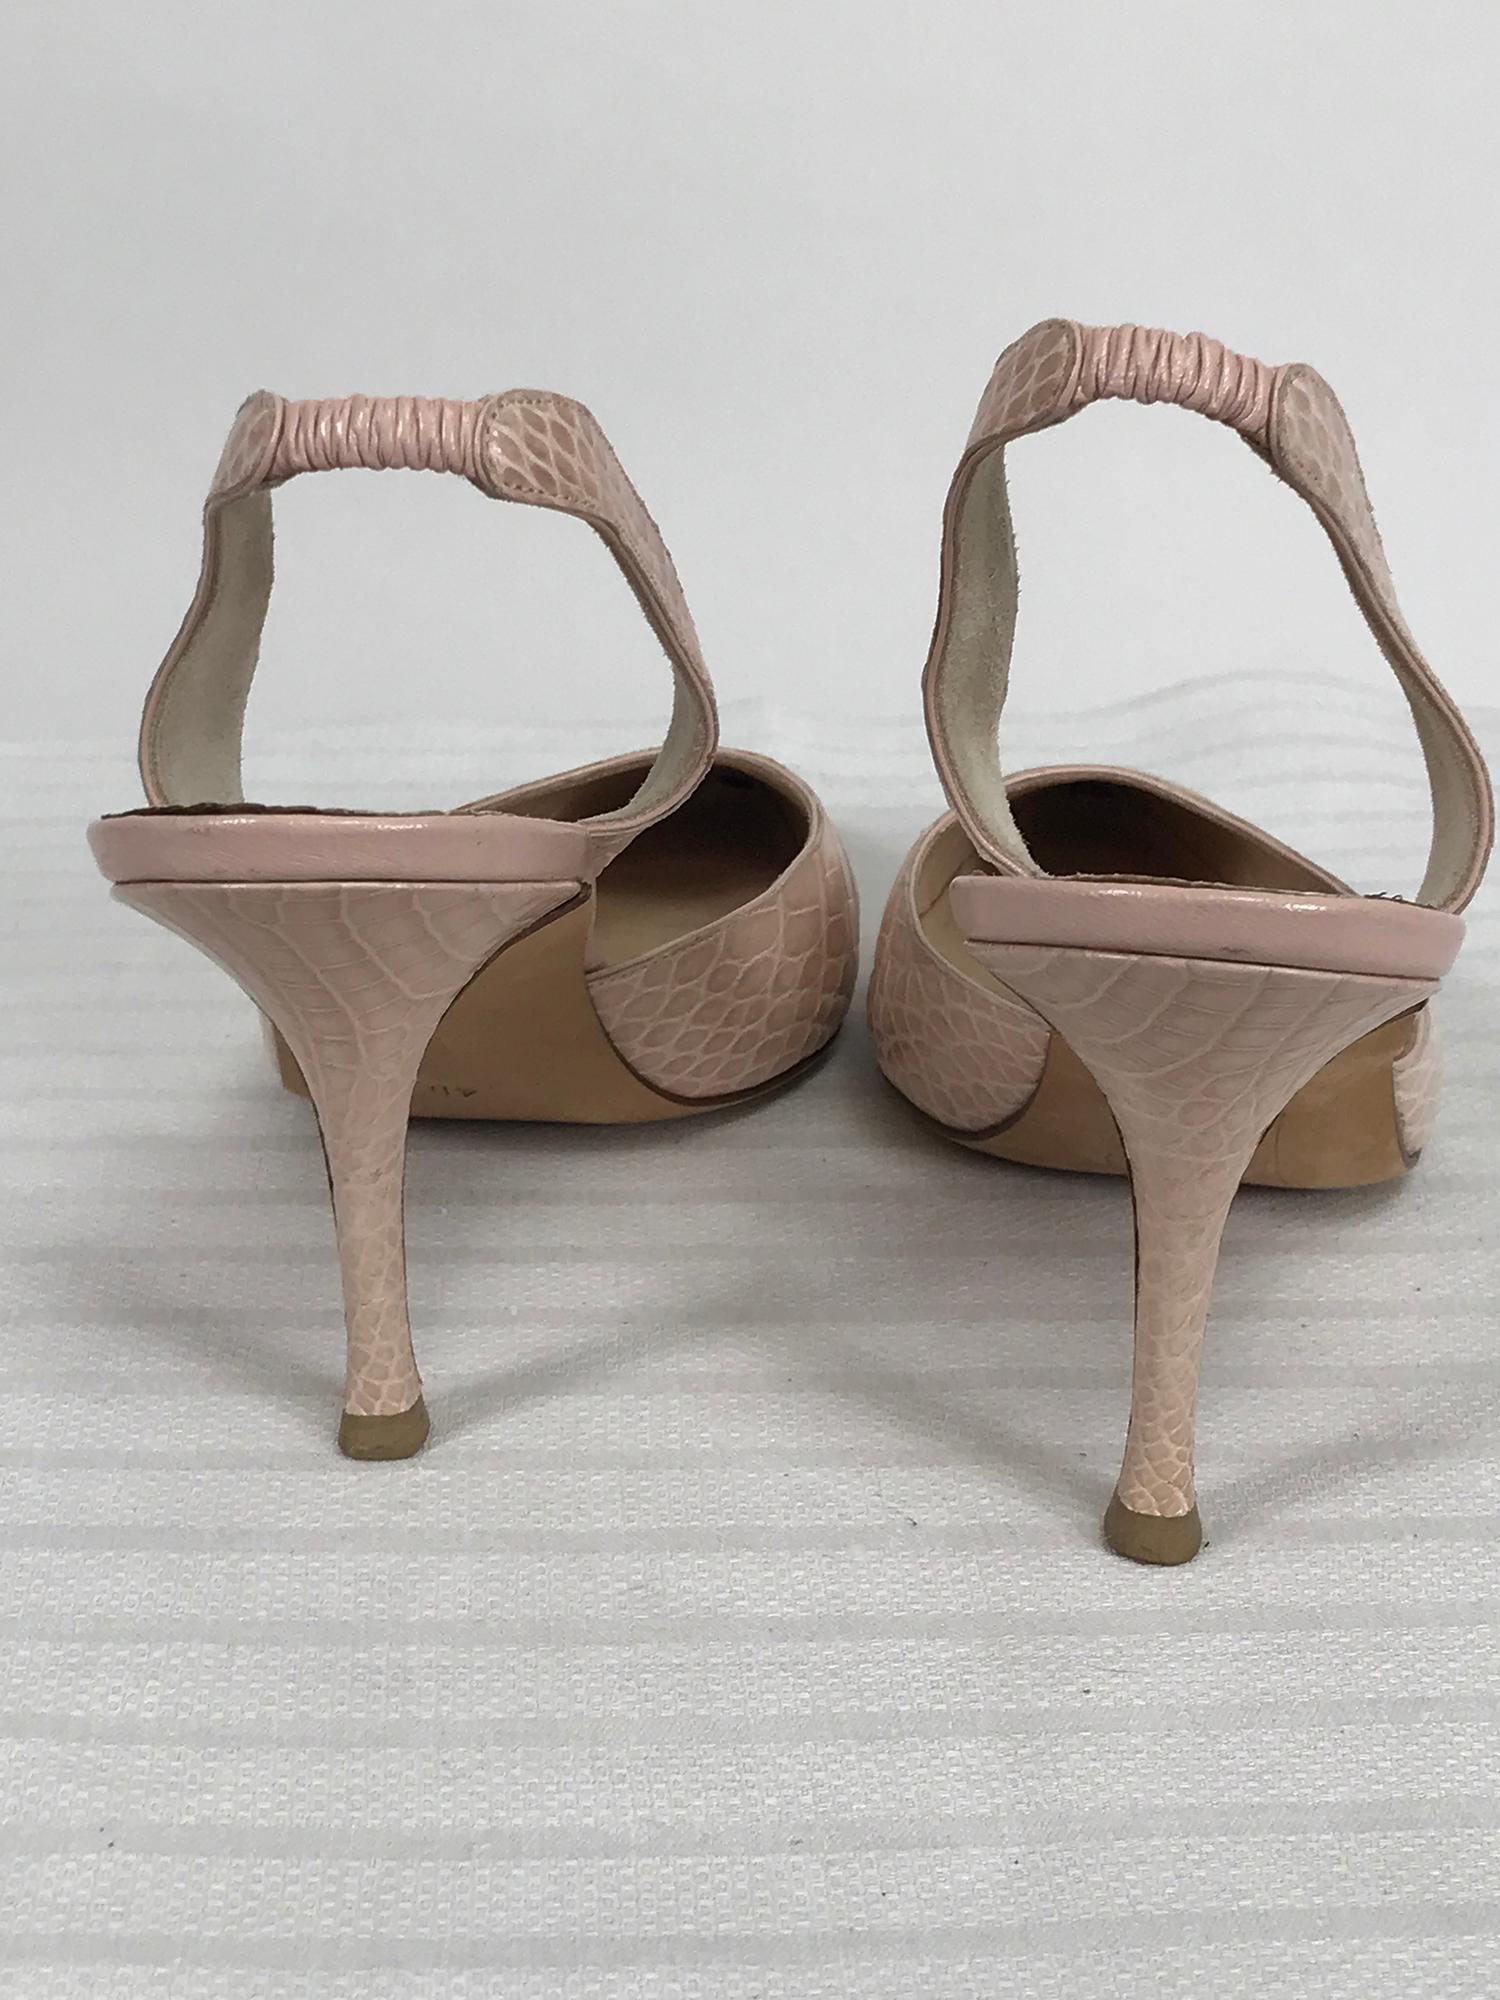 pale pink high heel shoes